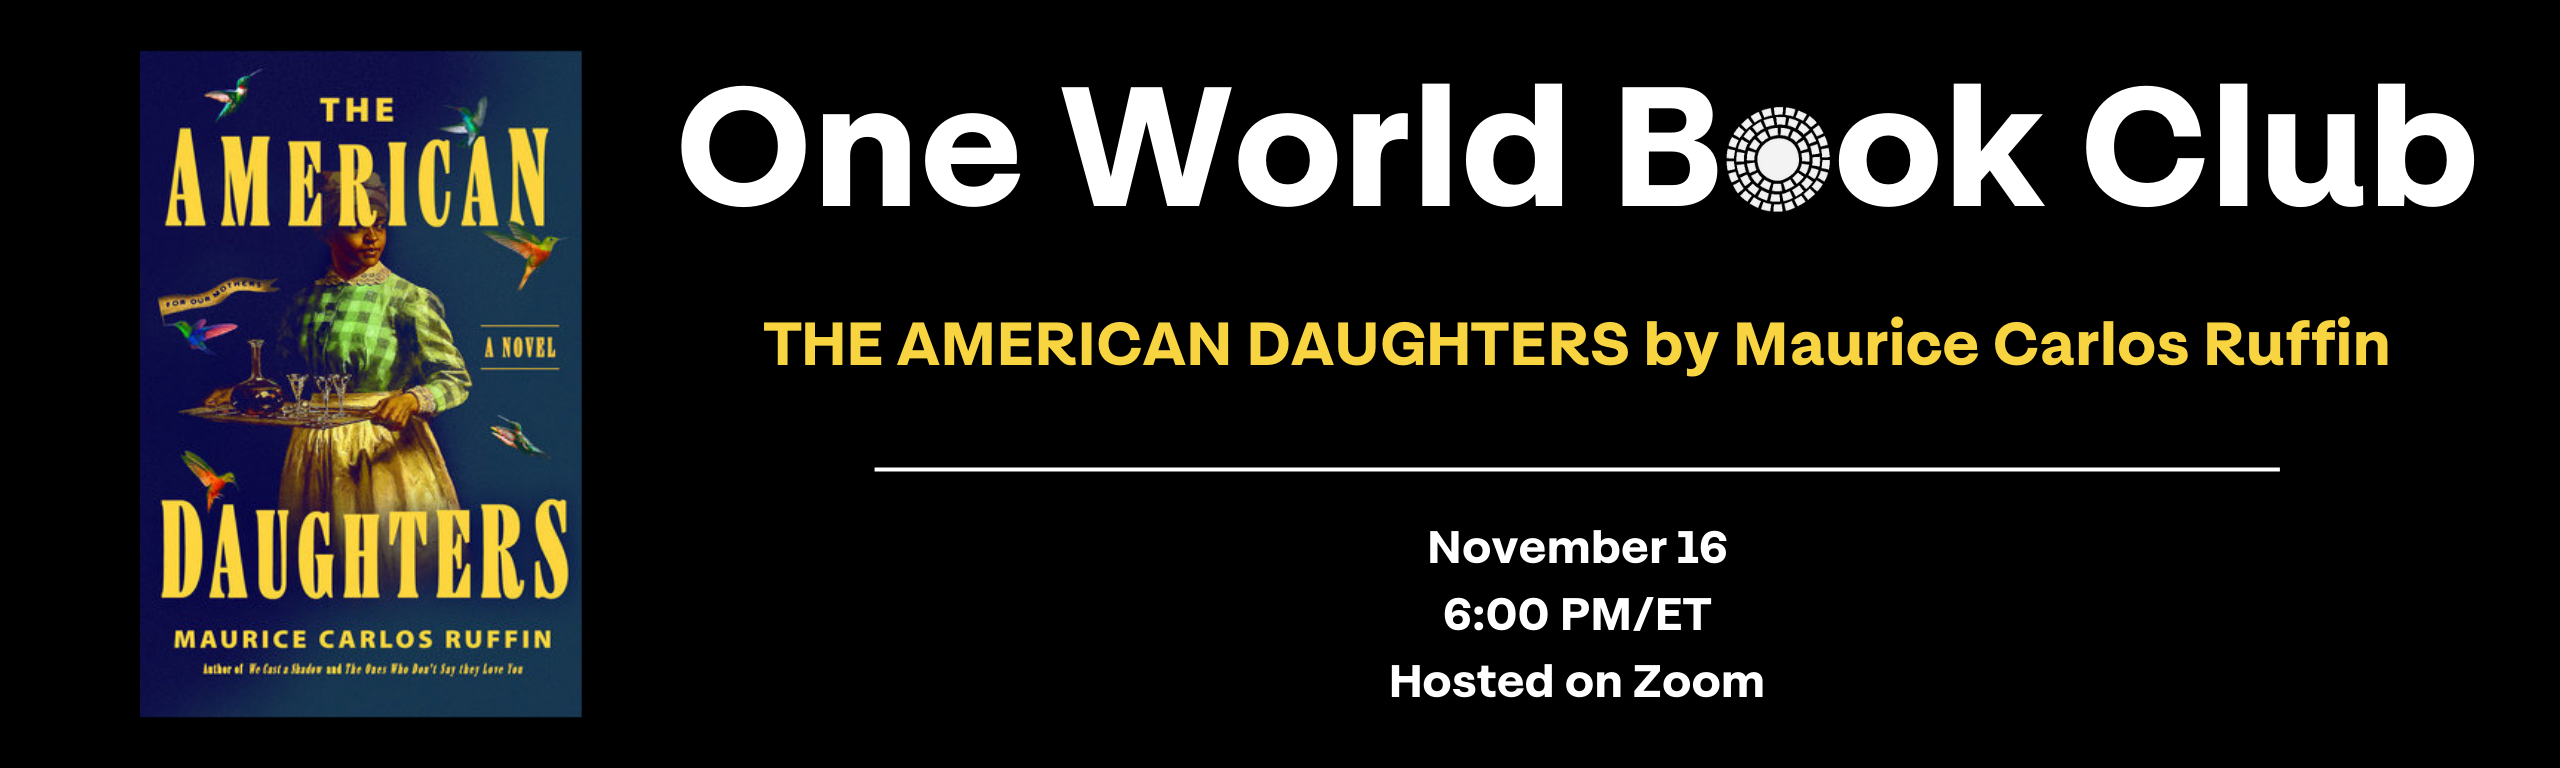 One World Book Club: THE AMERICAN DAUGHTERS